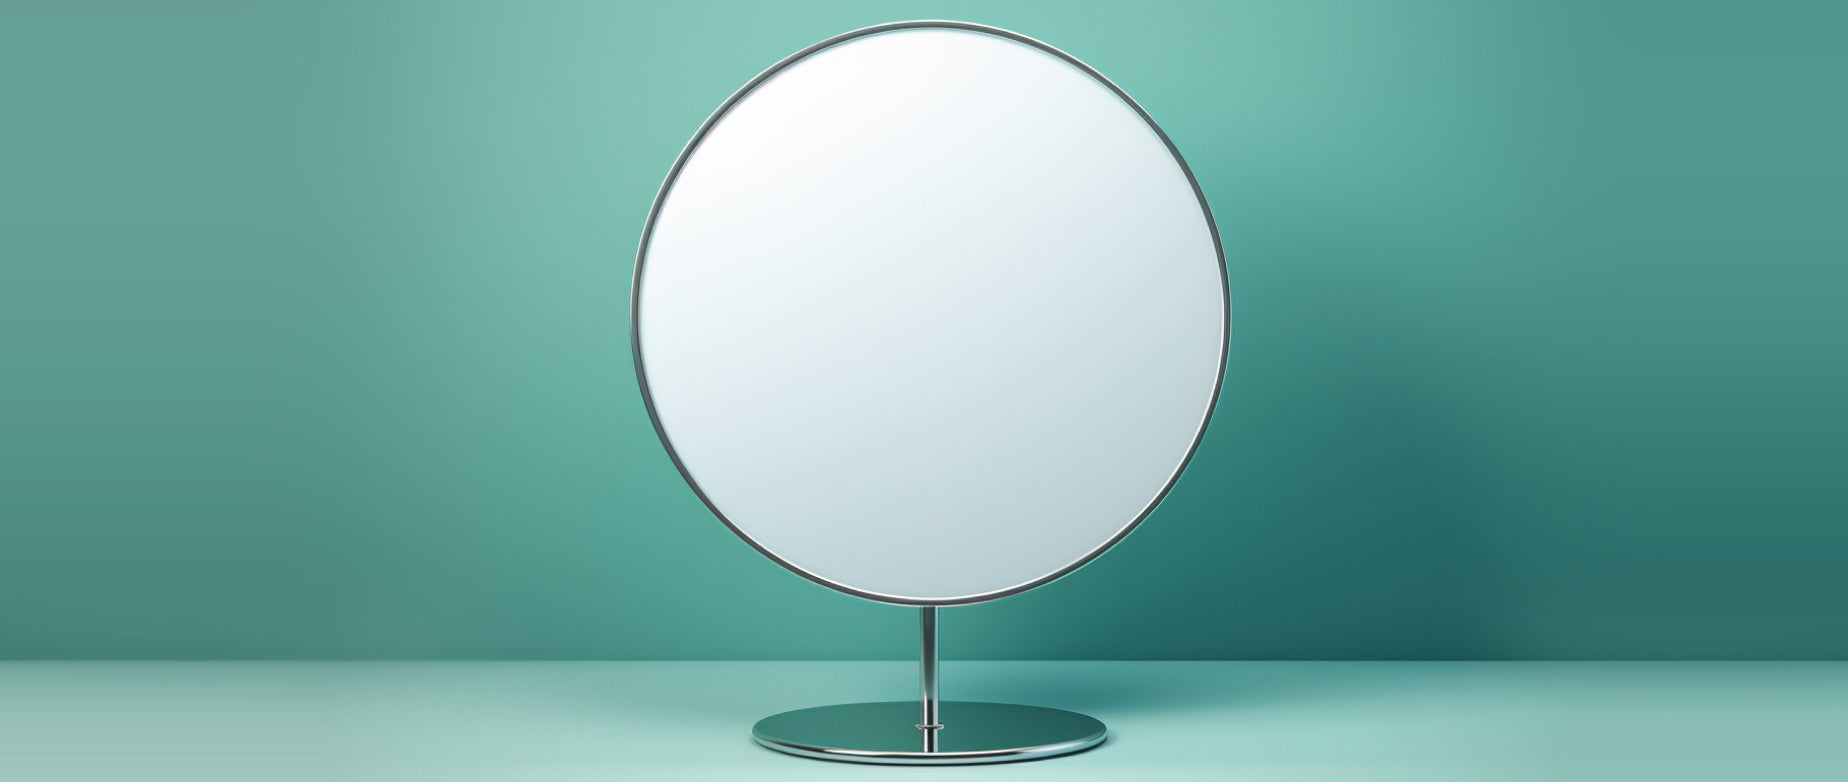 A tabletop mirror on a stand